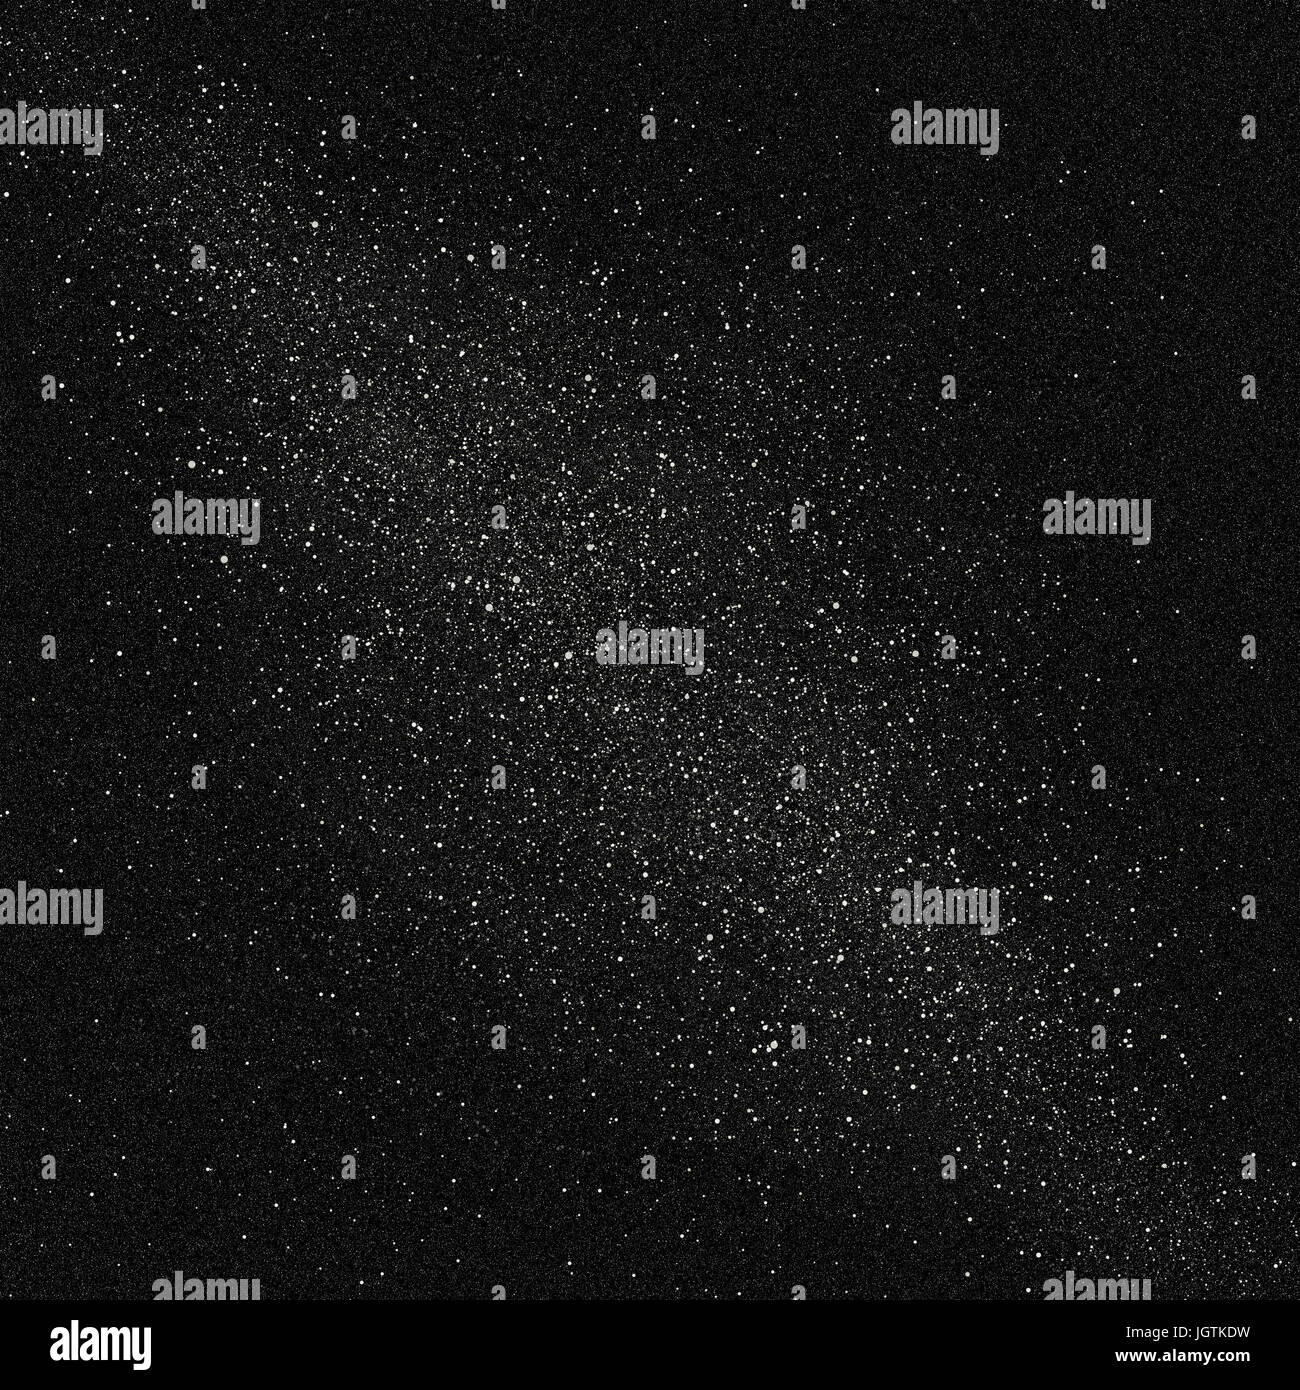 Night sky space illustration with stars,  up to 5000 x 5000 resolution. Stock Photo